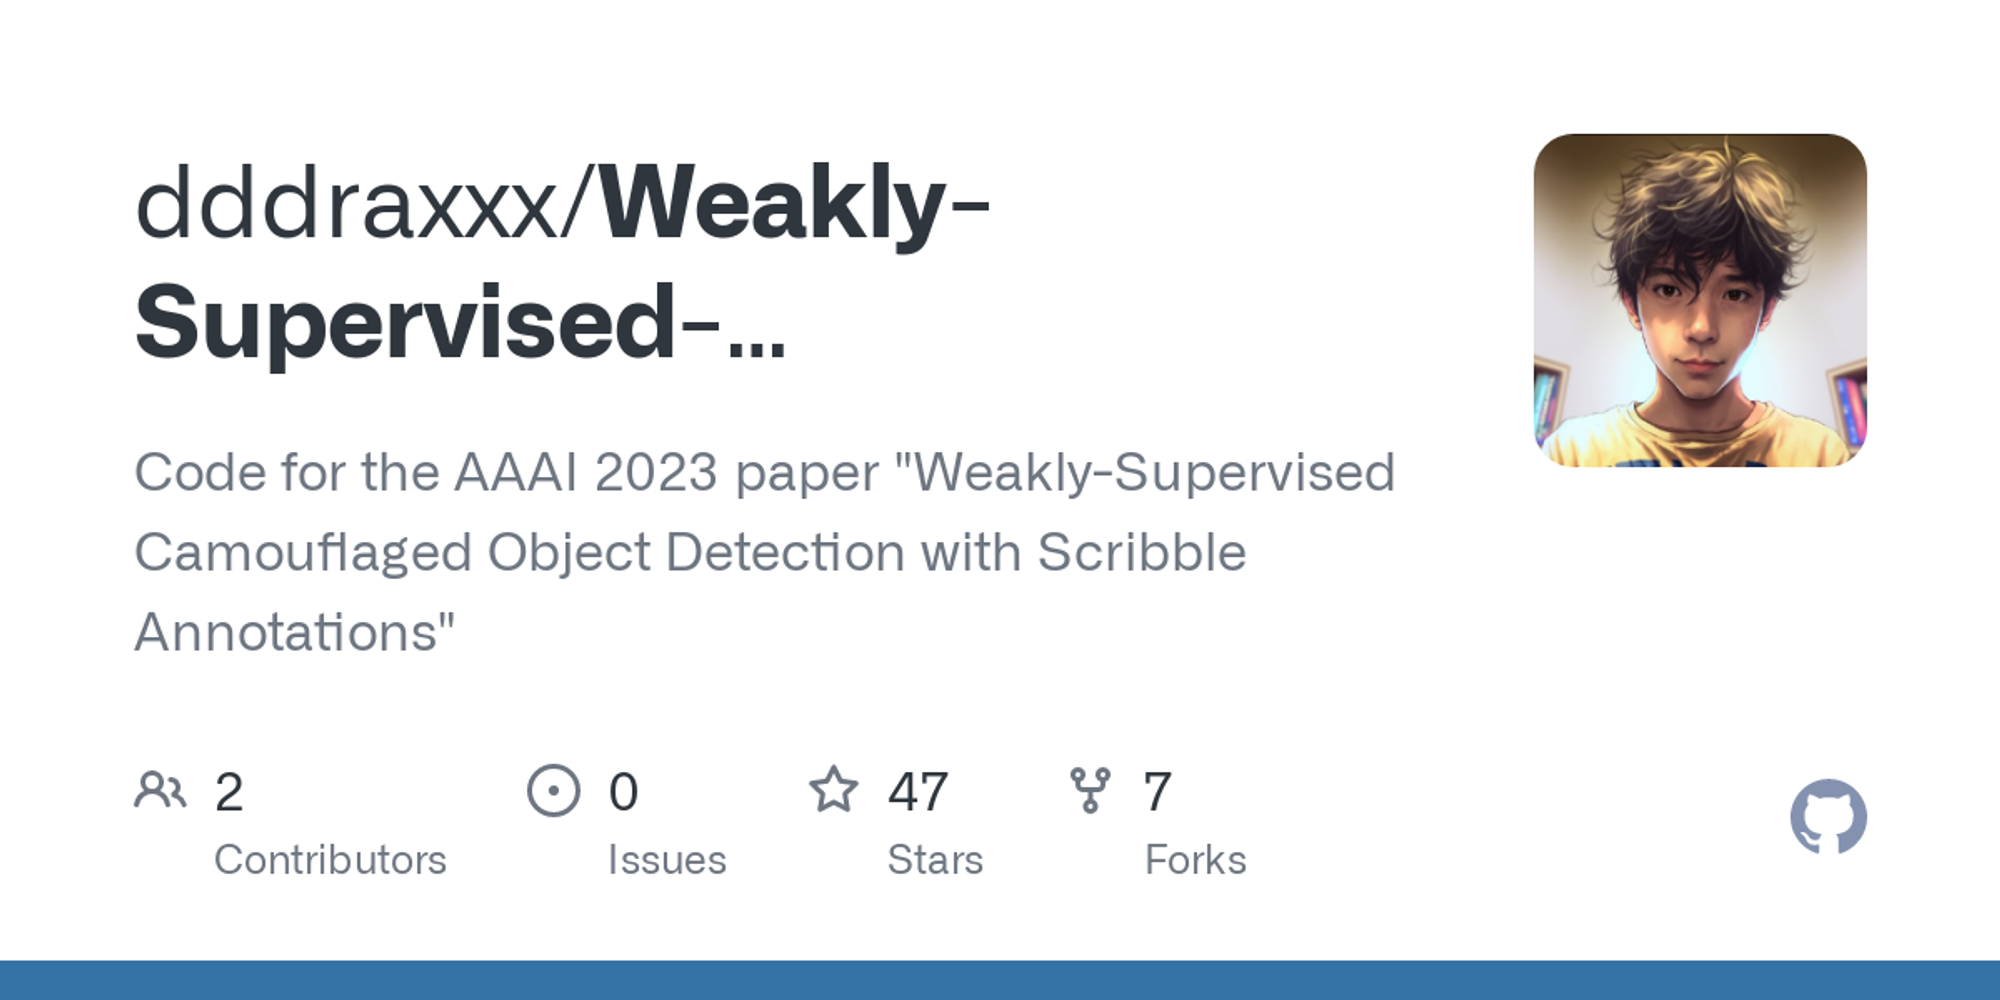 GitHub - dddraxxx/Weakly-Supervised-Camouflaged-Object-Detection-with-Scribble-Annotations: Code for the AAAI 2023 paper "Weakly-Supervised Camouflaged Object Detection with Scribble Annotations"